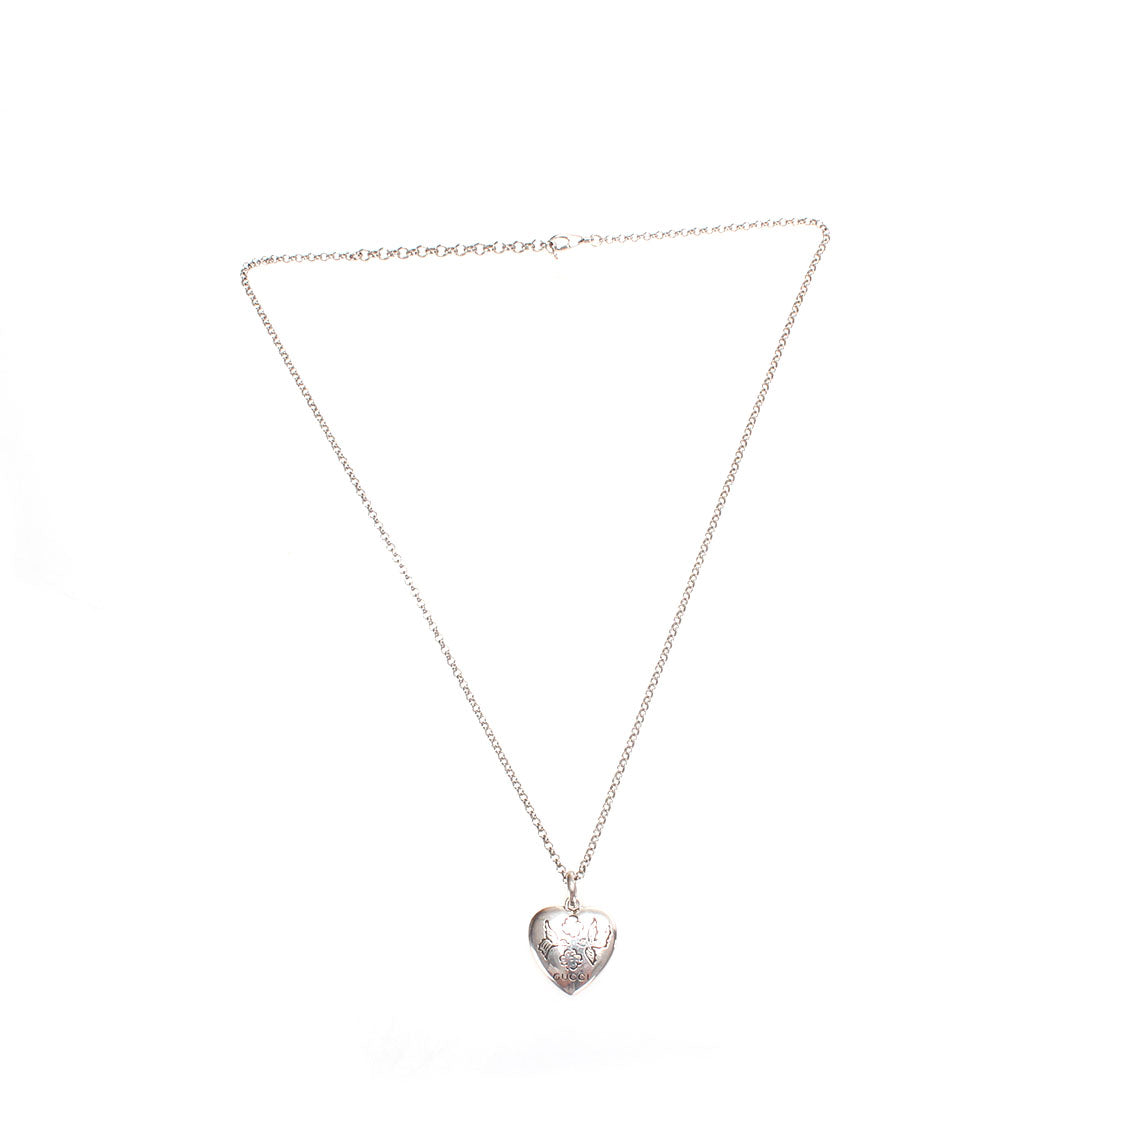 Blind for Love Heart Pendant Necklace